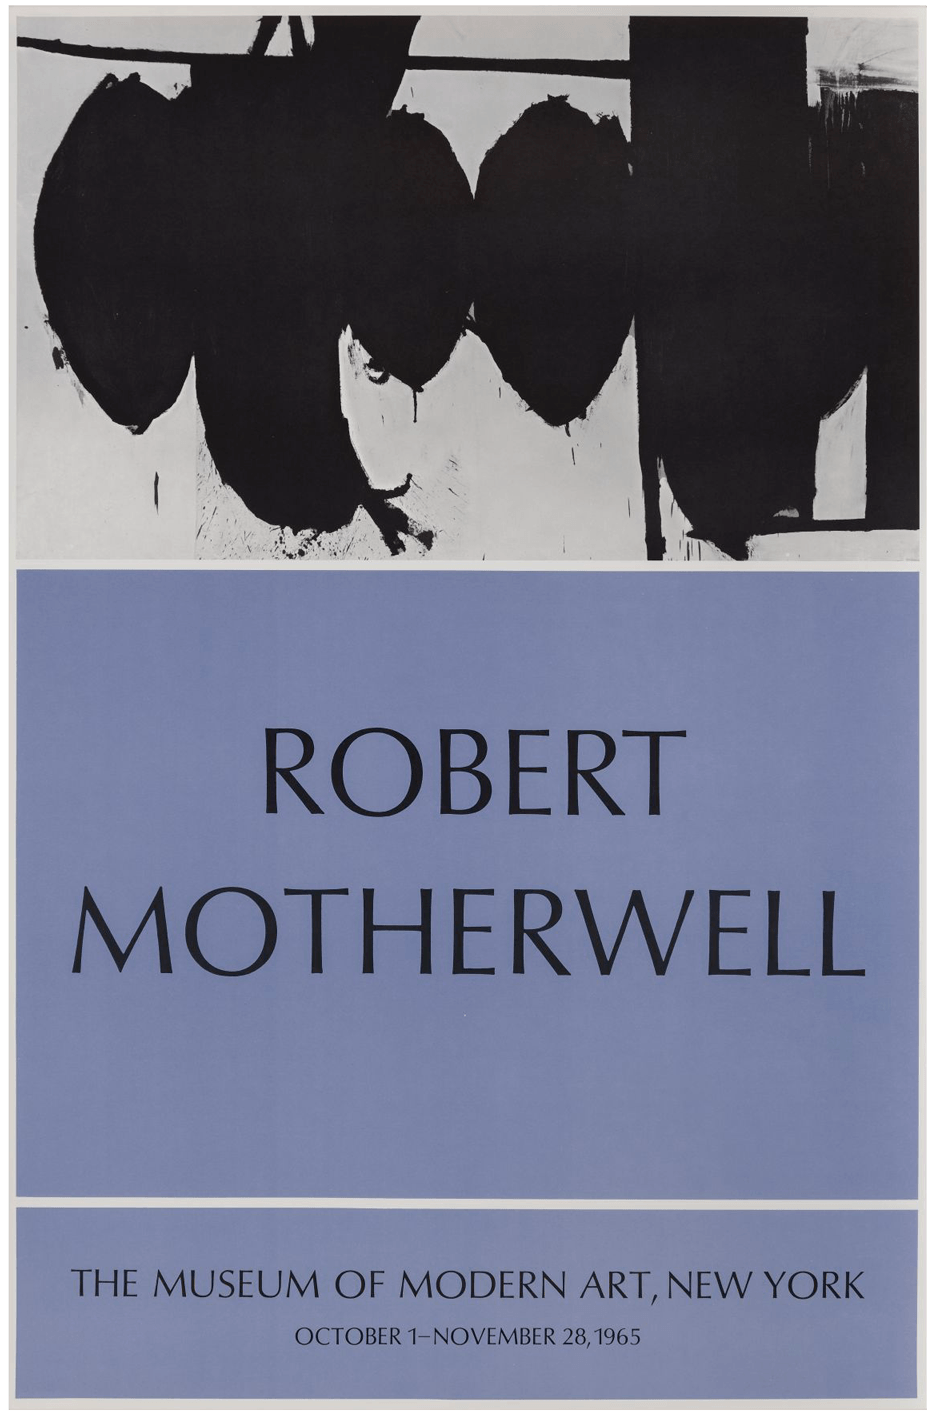 The Museum of Modern Art Poster, 1965